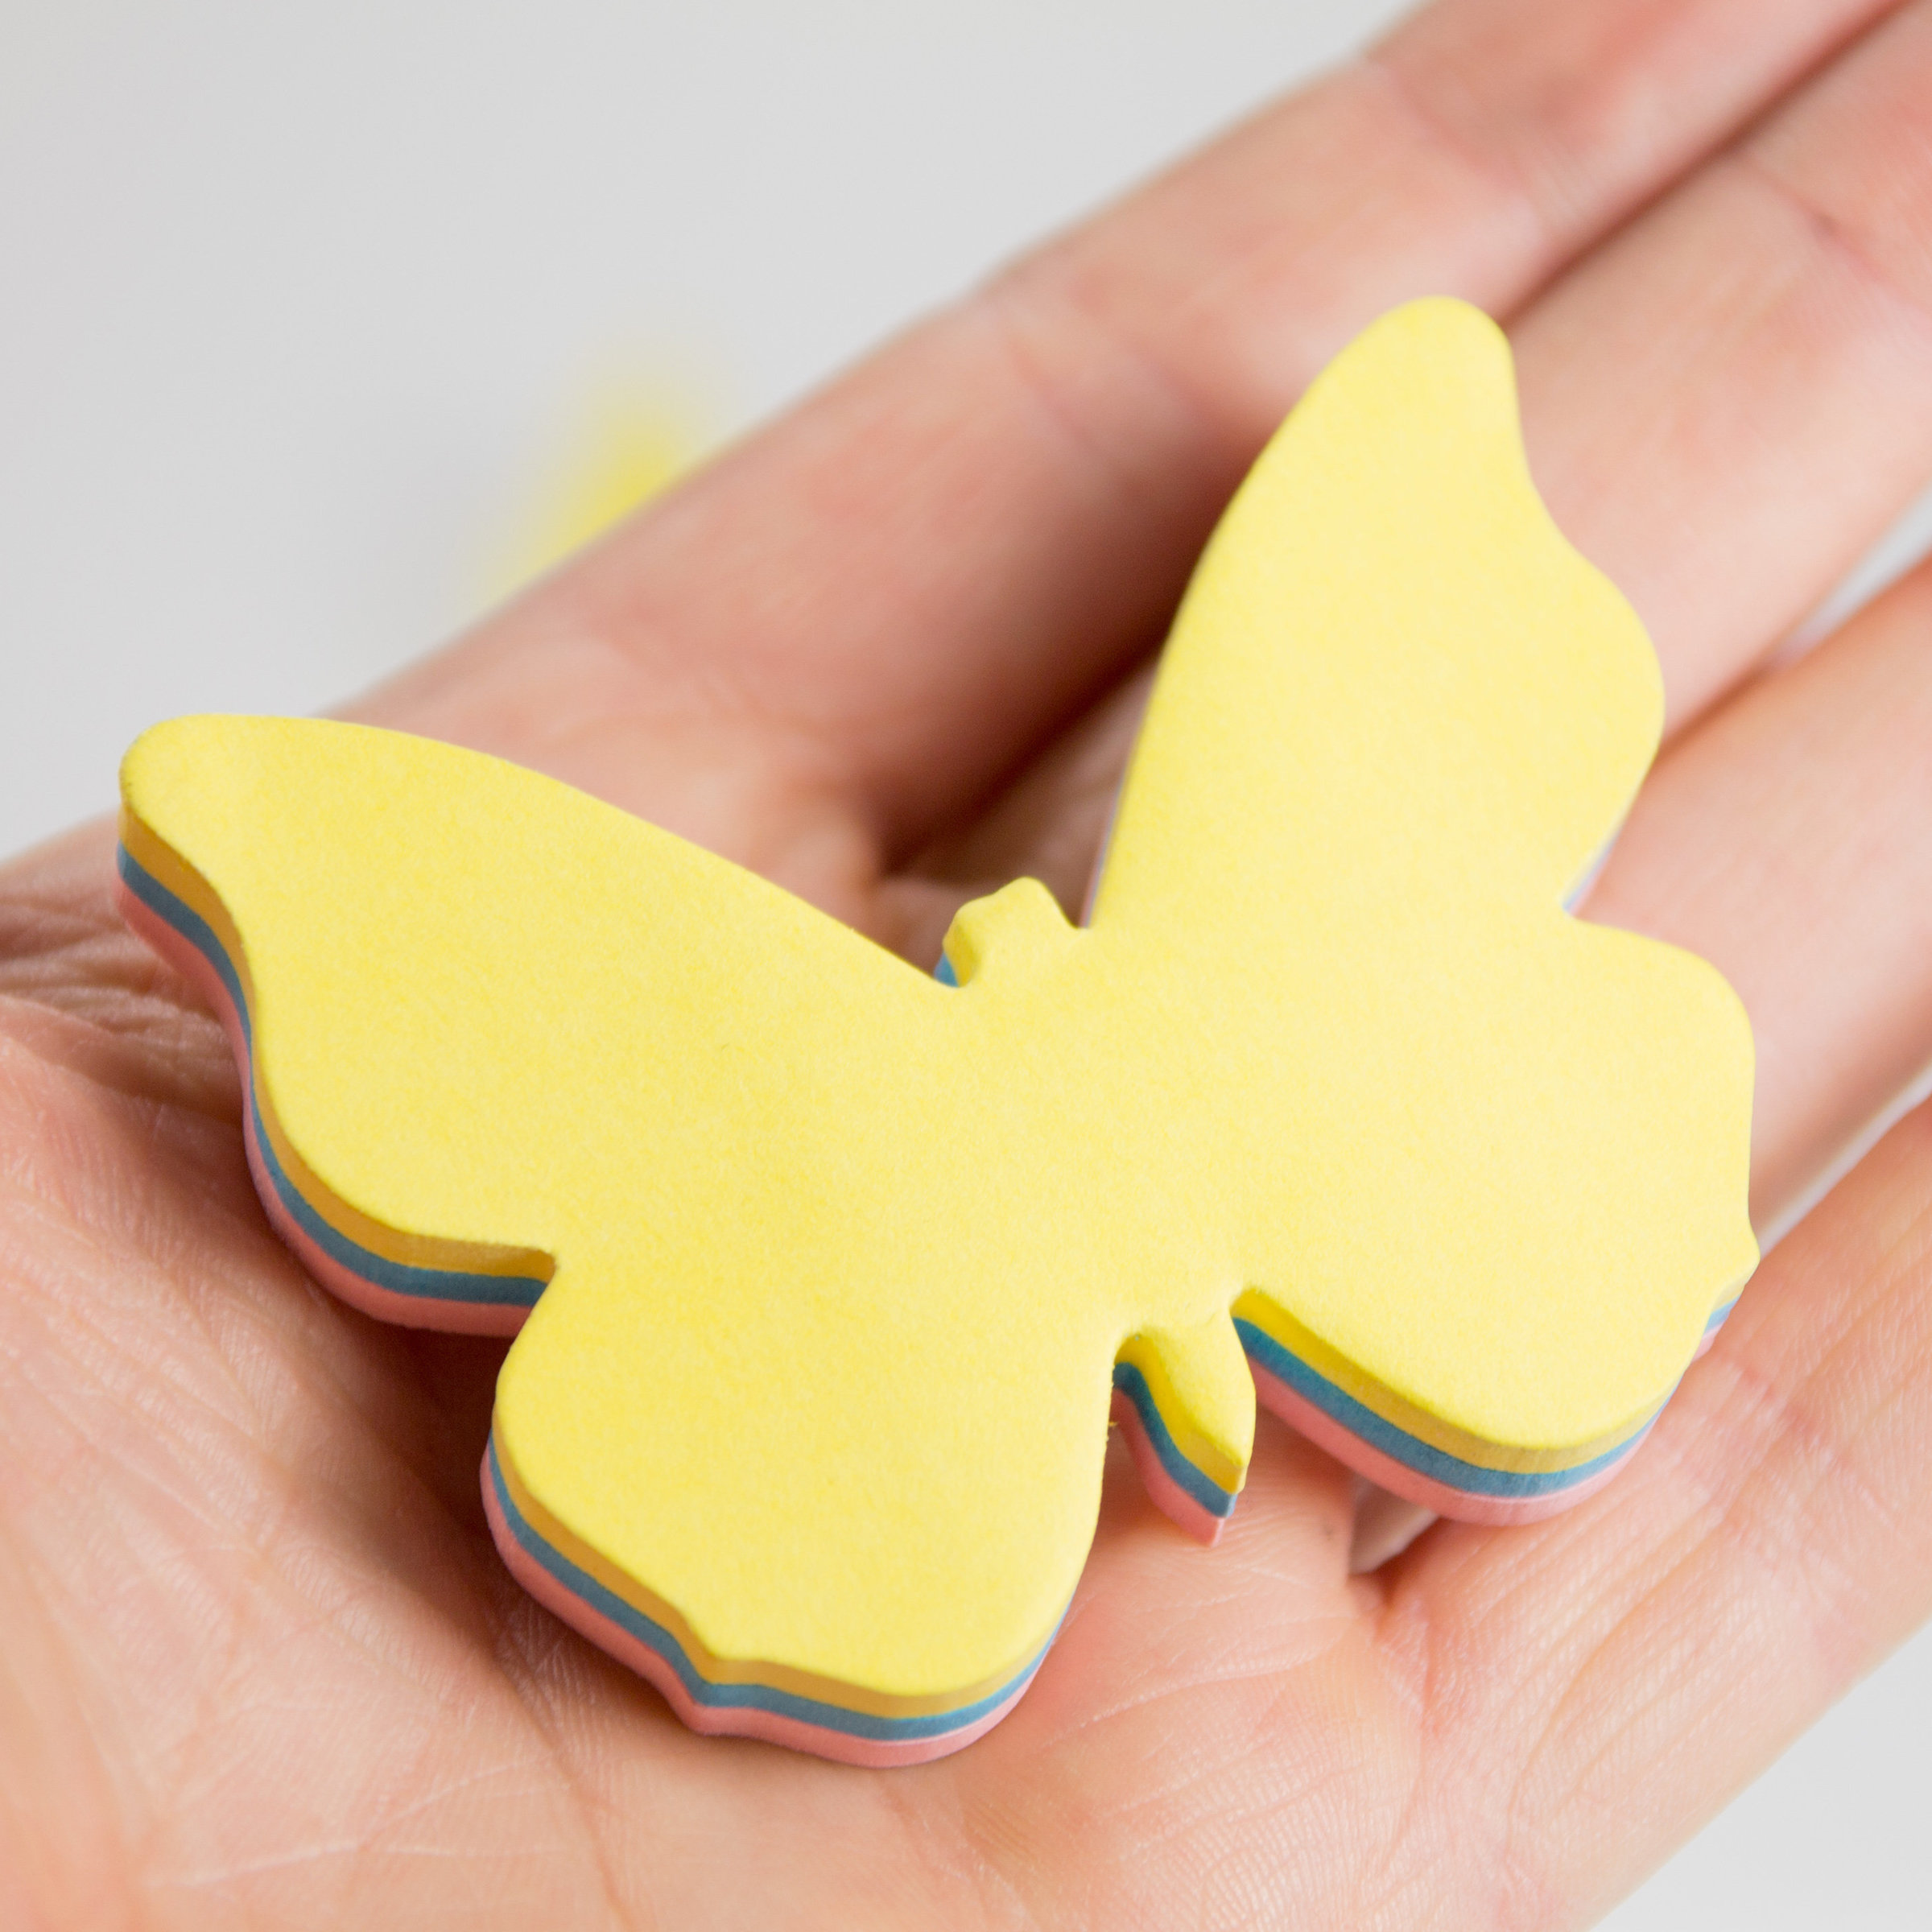 Butterfly sticky note pads in a hand